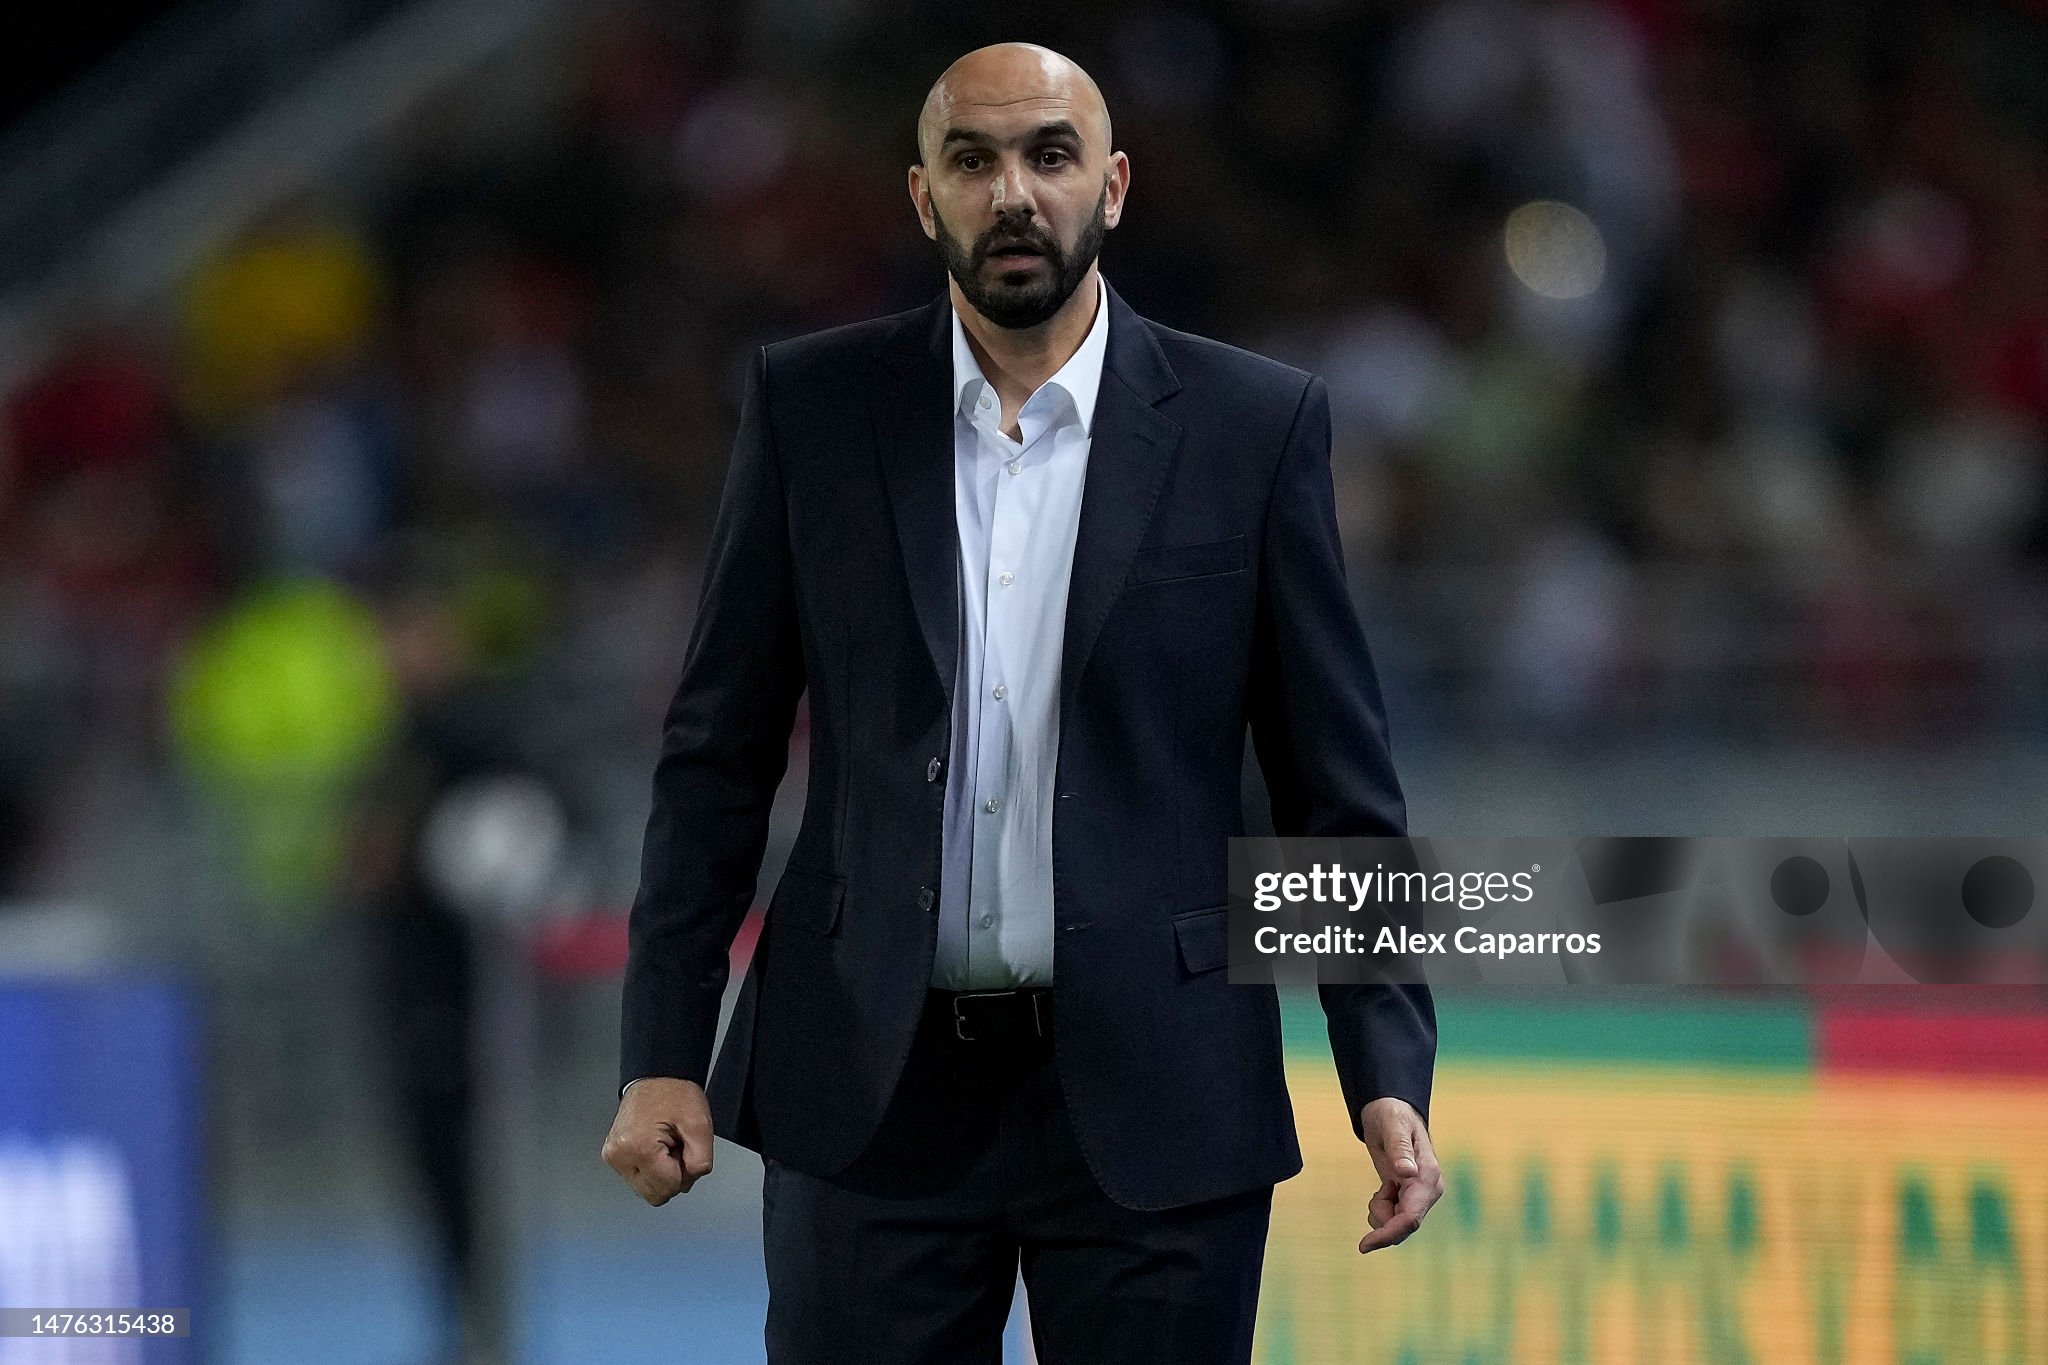 Morocco, unlike Egypt, retains confidence in national coach